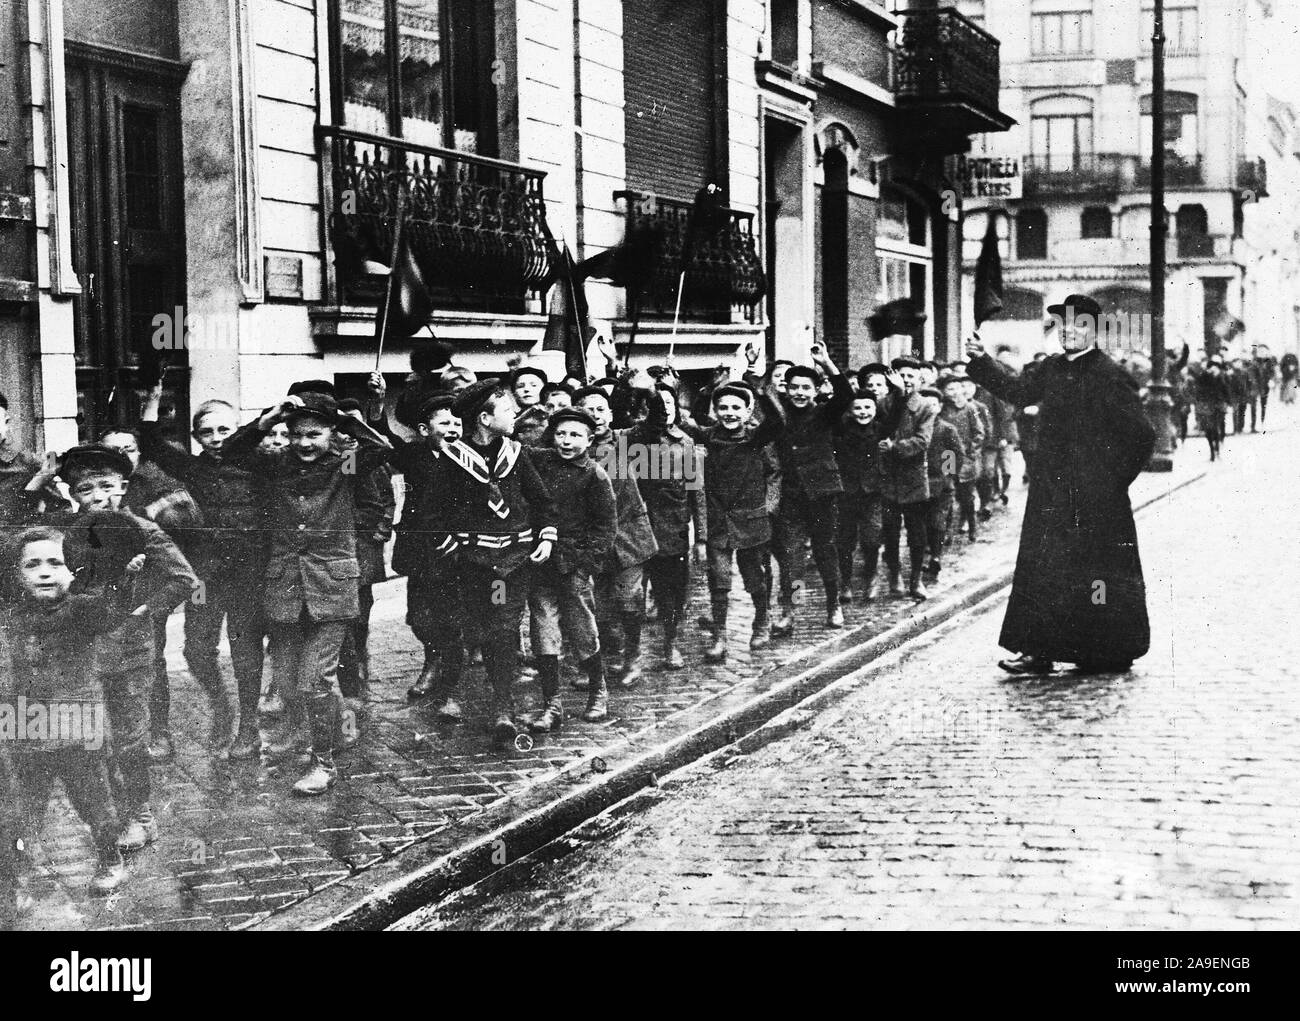 Belgium - Children of Ostend rejoice at being liberated. The joy and gladness that fill these little hearts at being liberated from the Hun rule is shown by their smiling faces and cheering Stock Photo